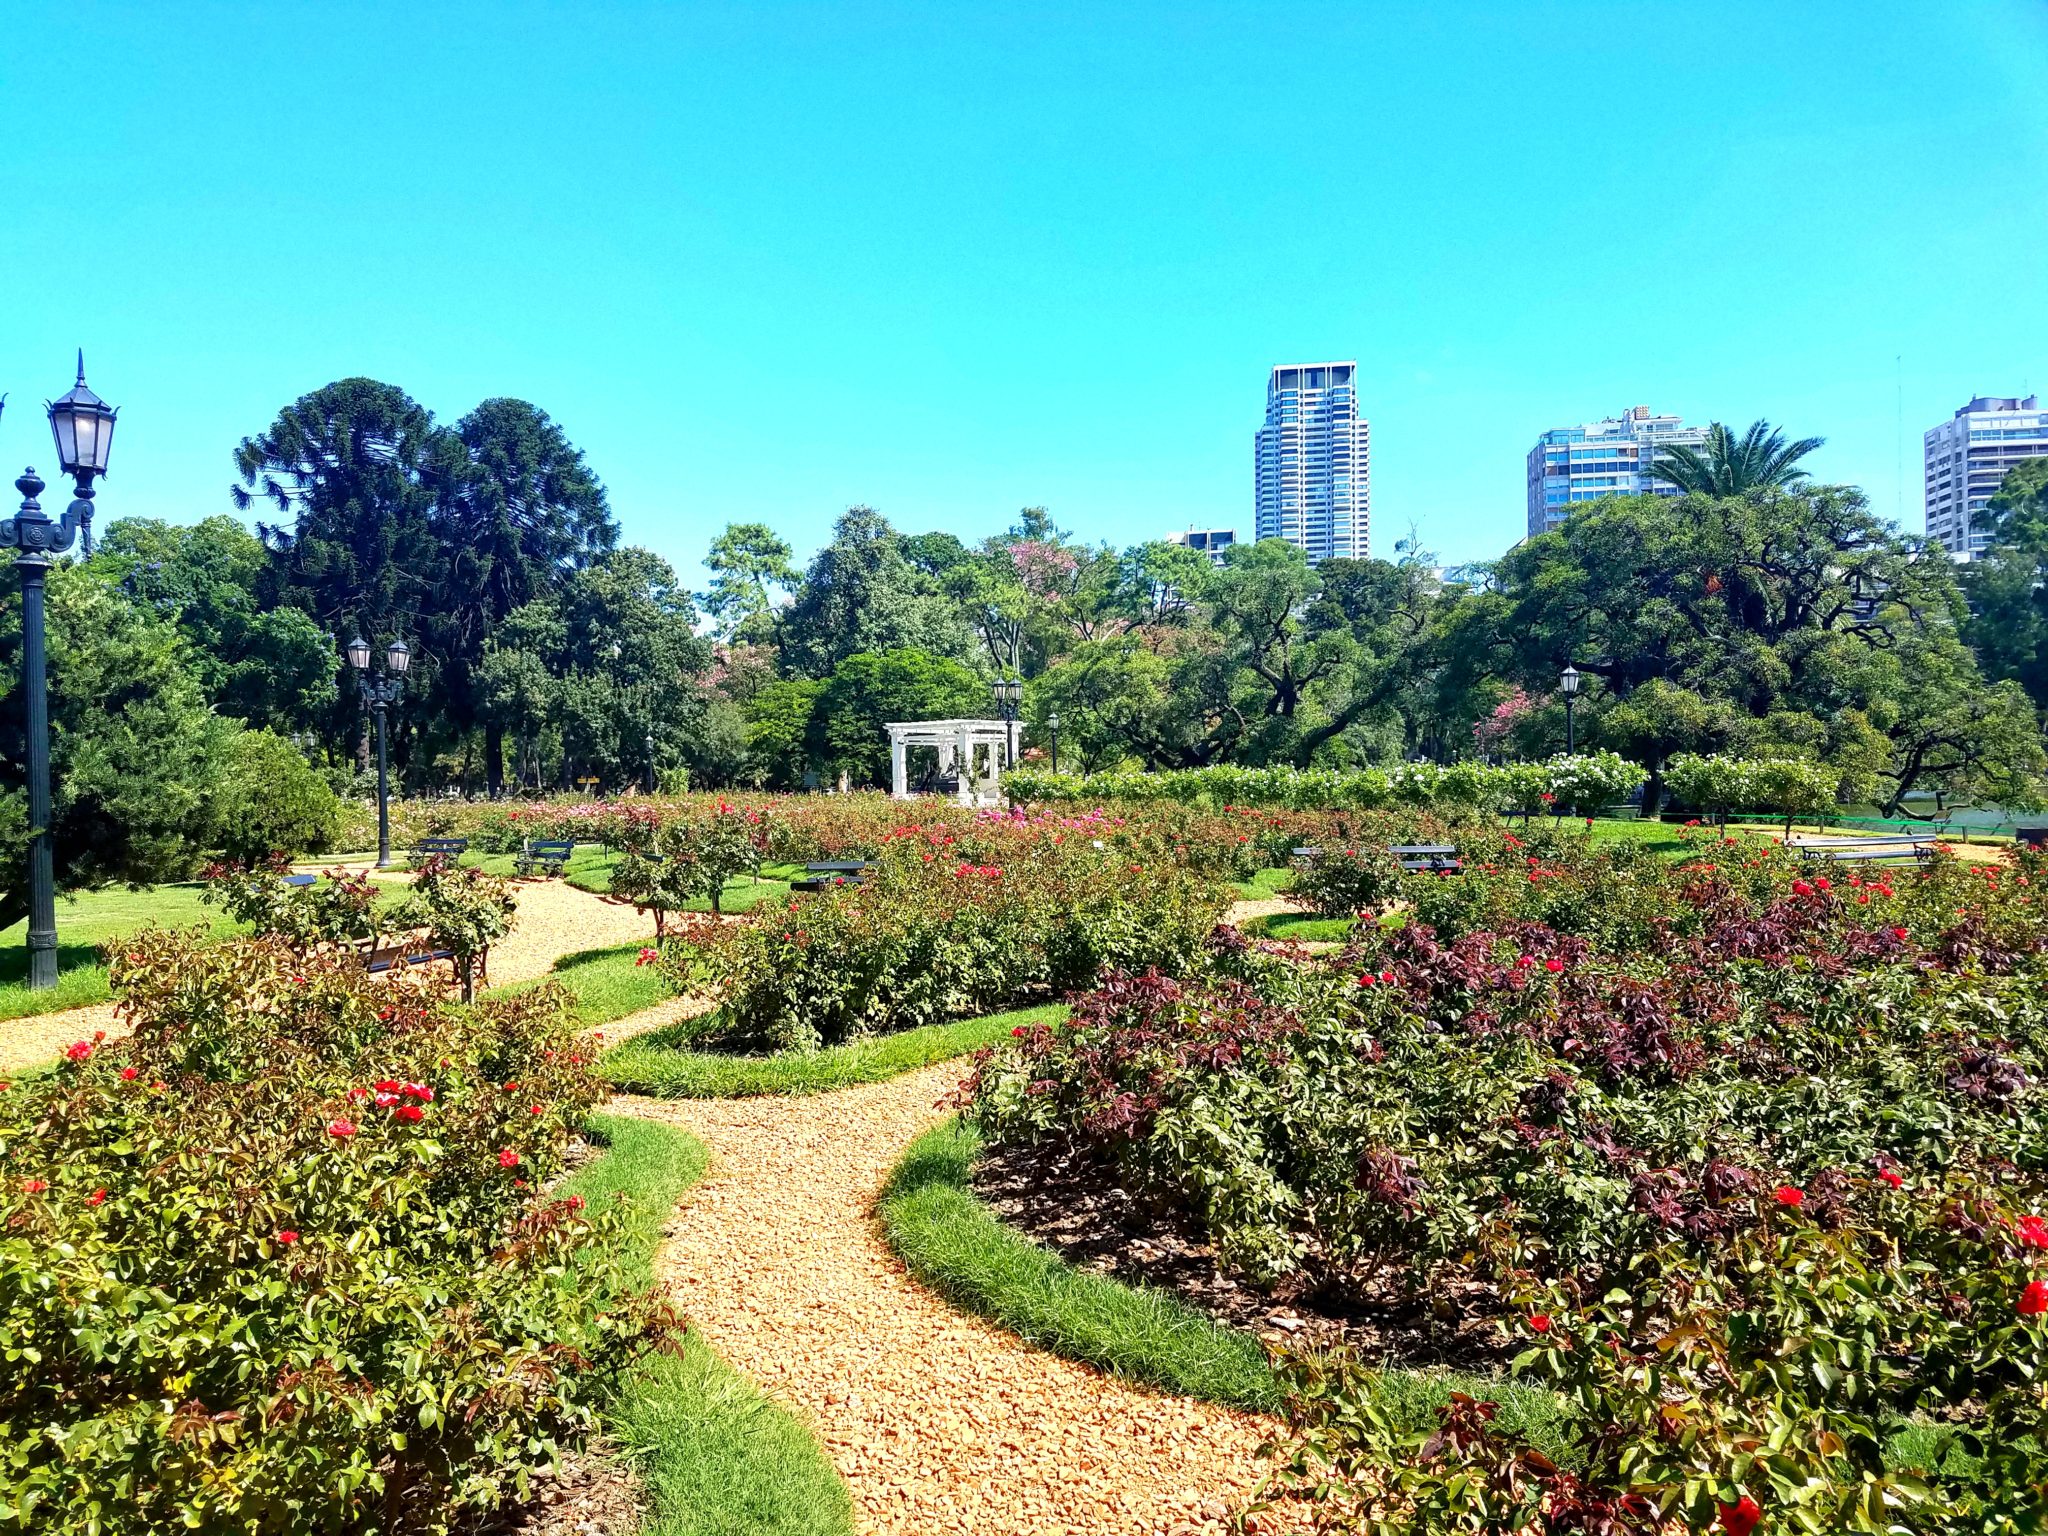 The Rose Gardens in Buenos Aires, Argentina